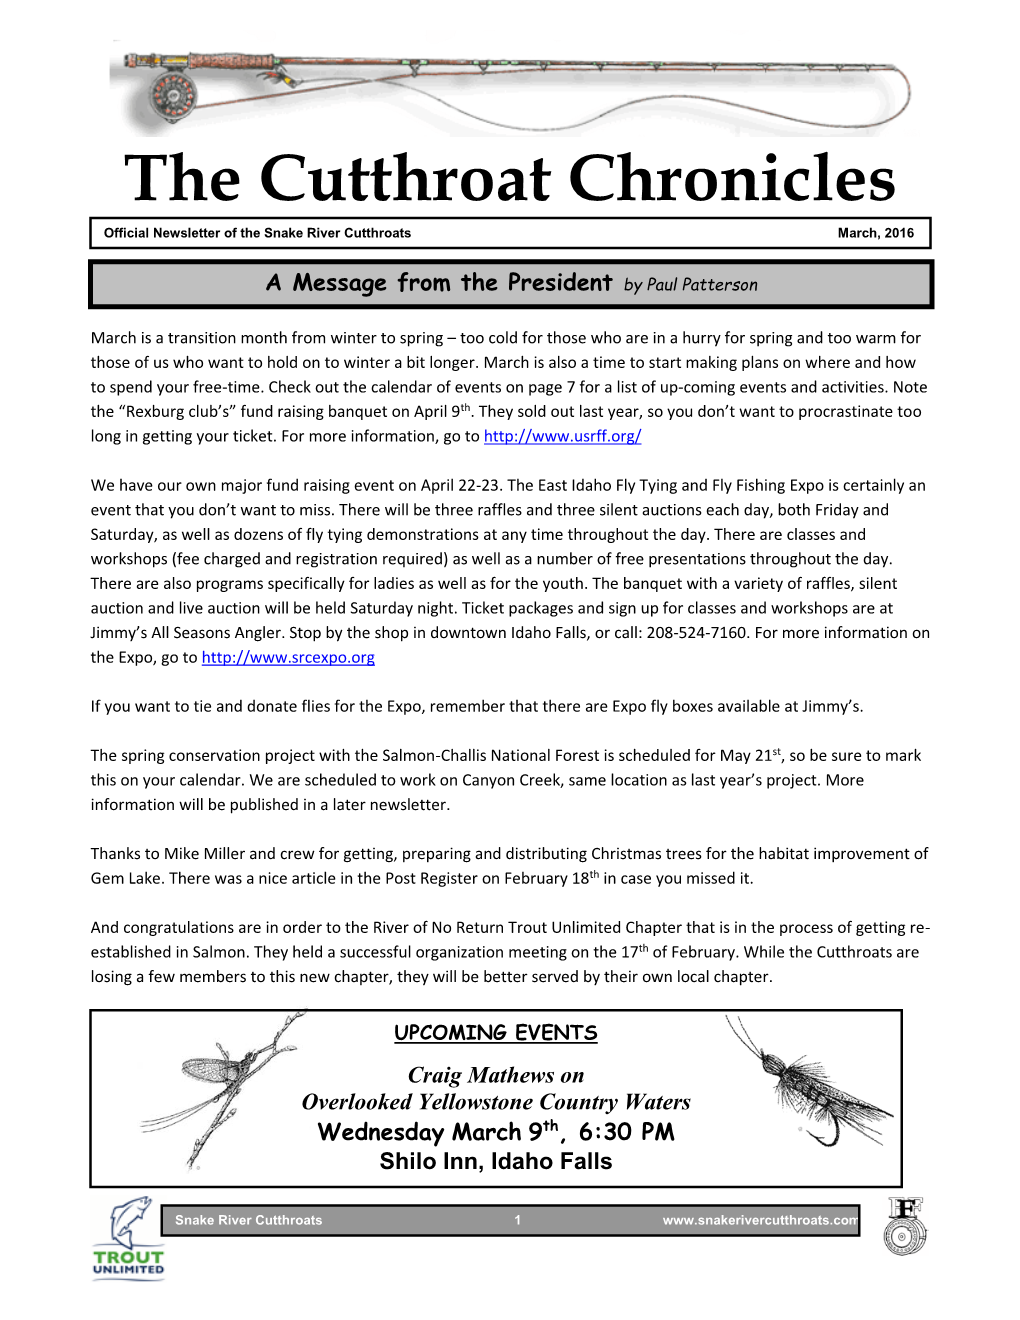 The Cutthroat Chronicles Official Newsletter of the Snake River Cutthroats March, 2016